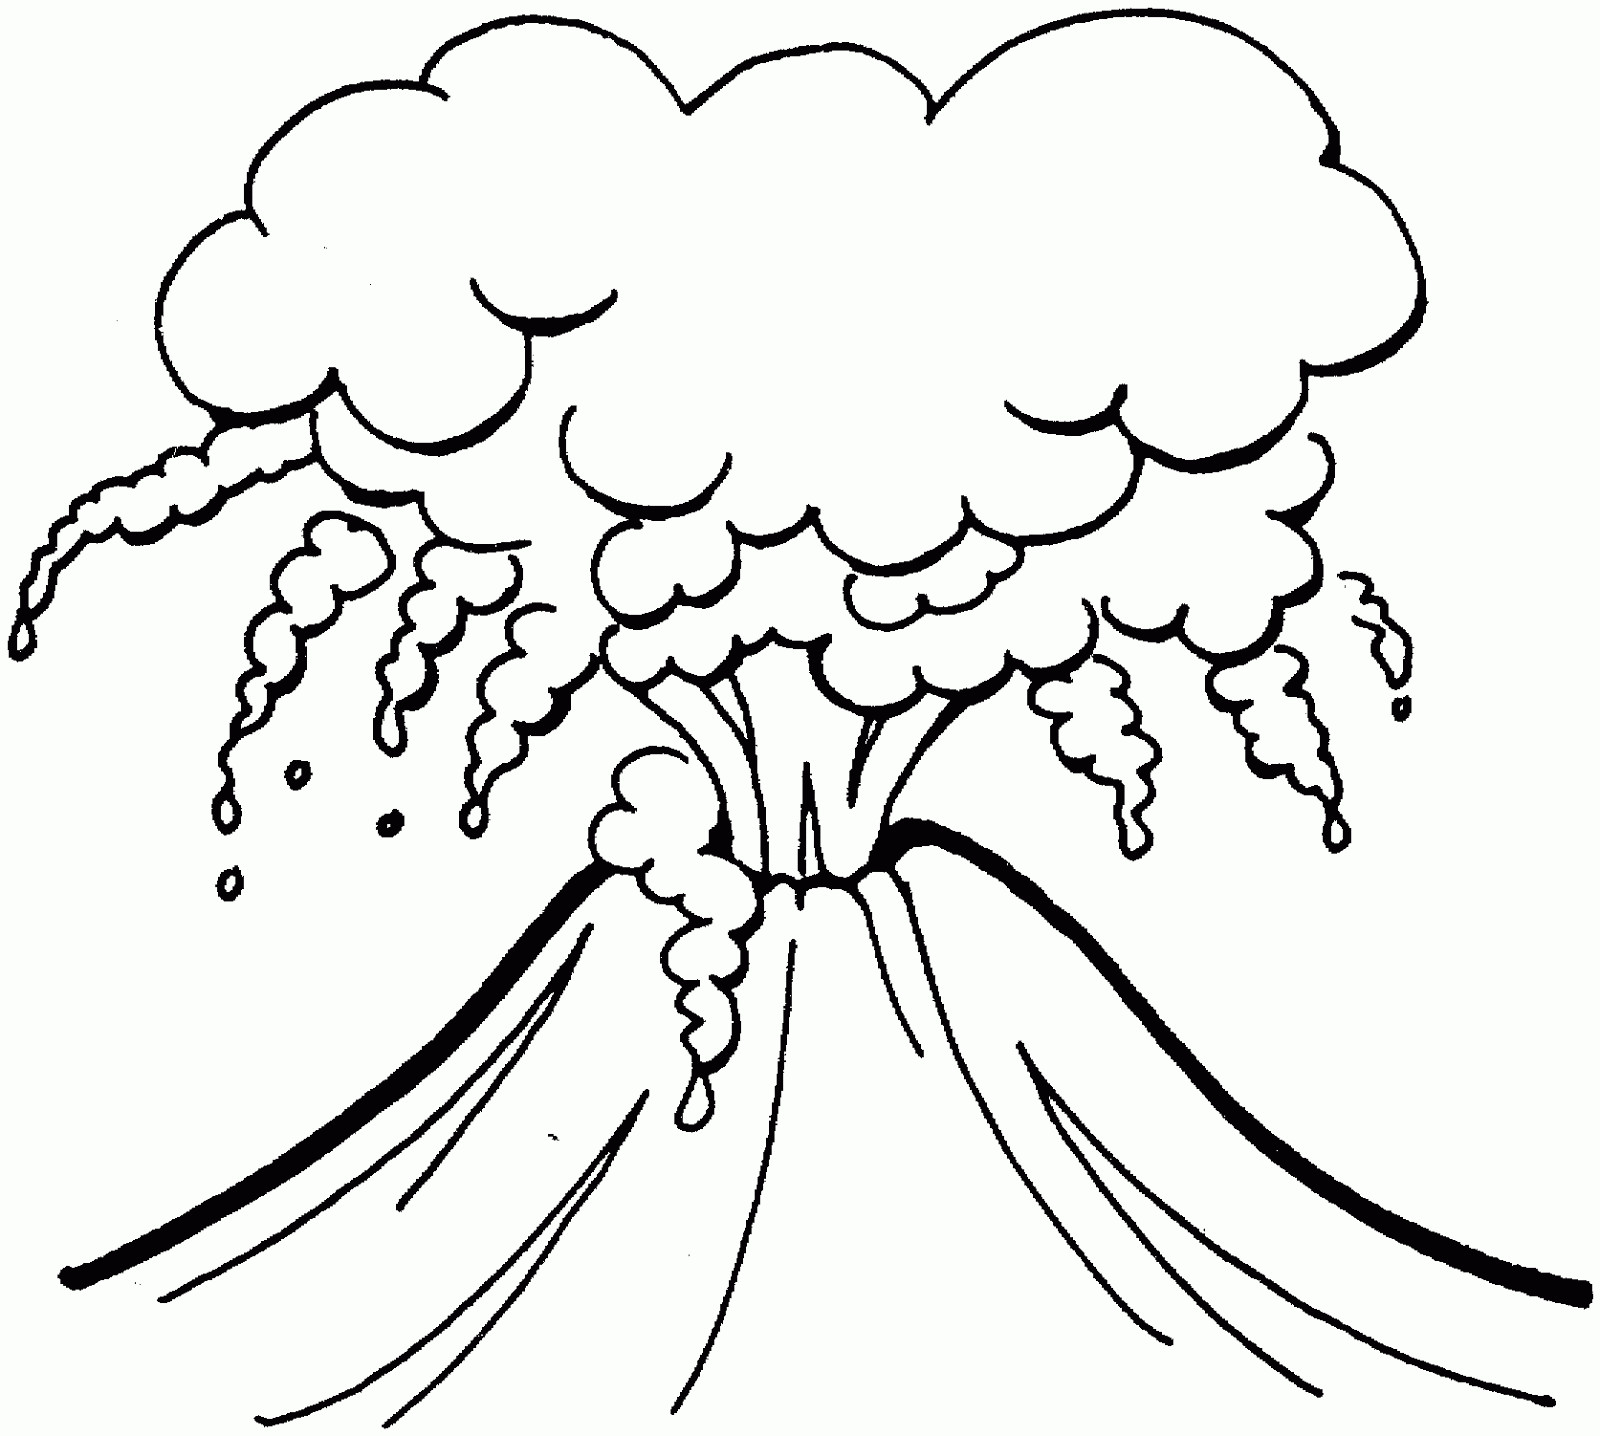 Volcano Coloring Pages
 Just JoeP April 2012